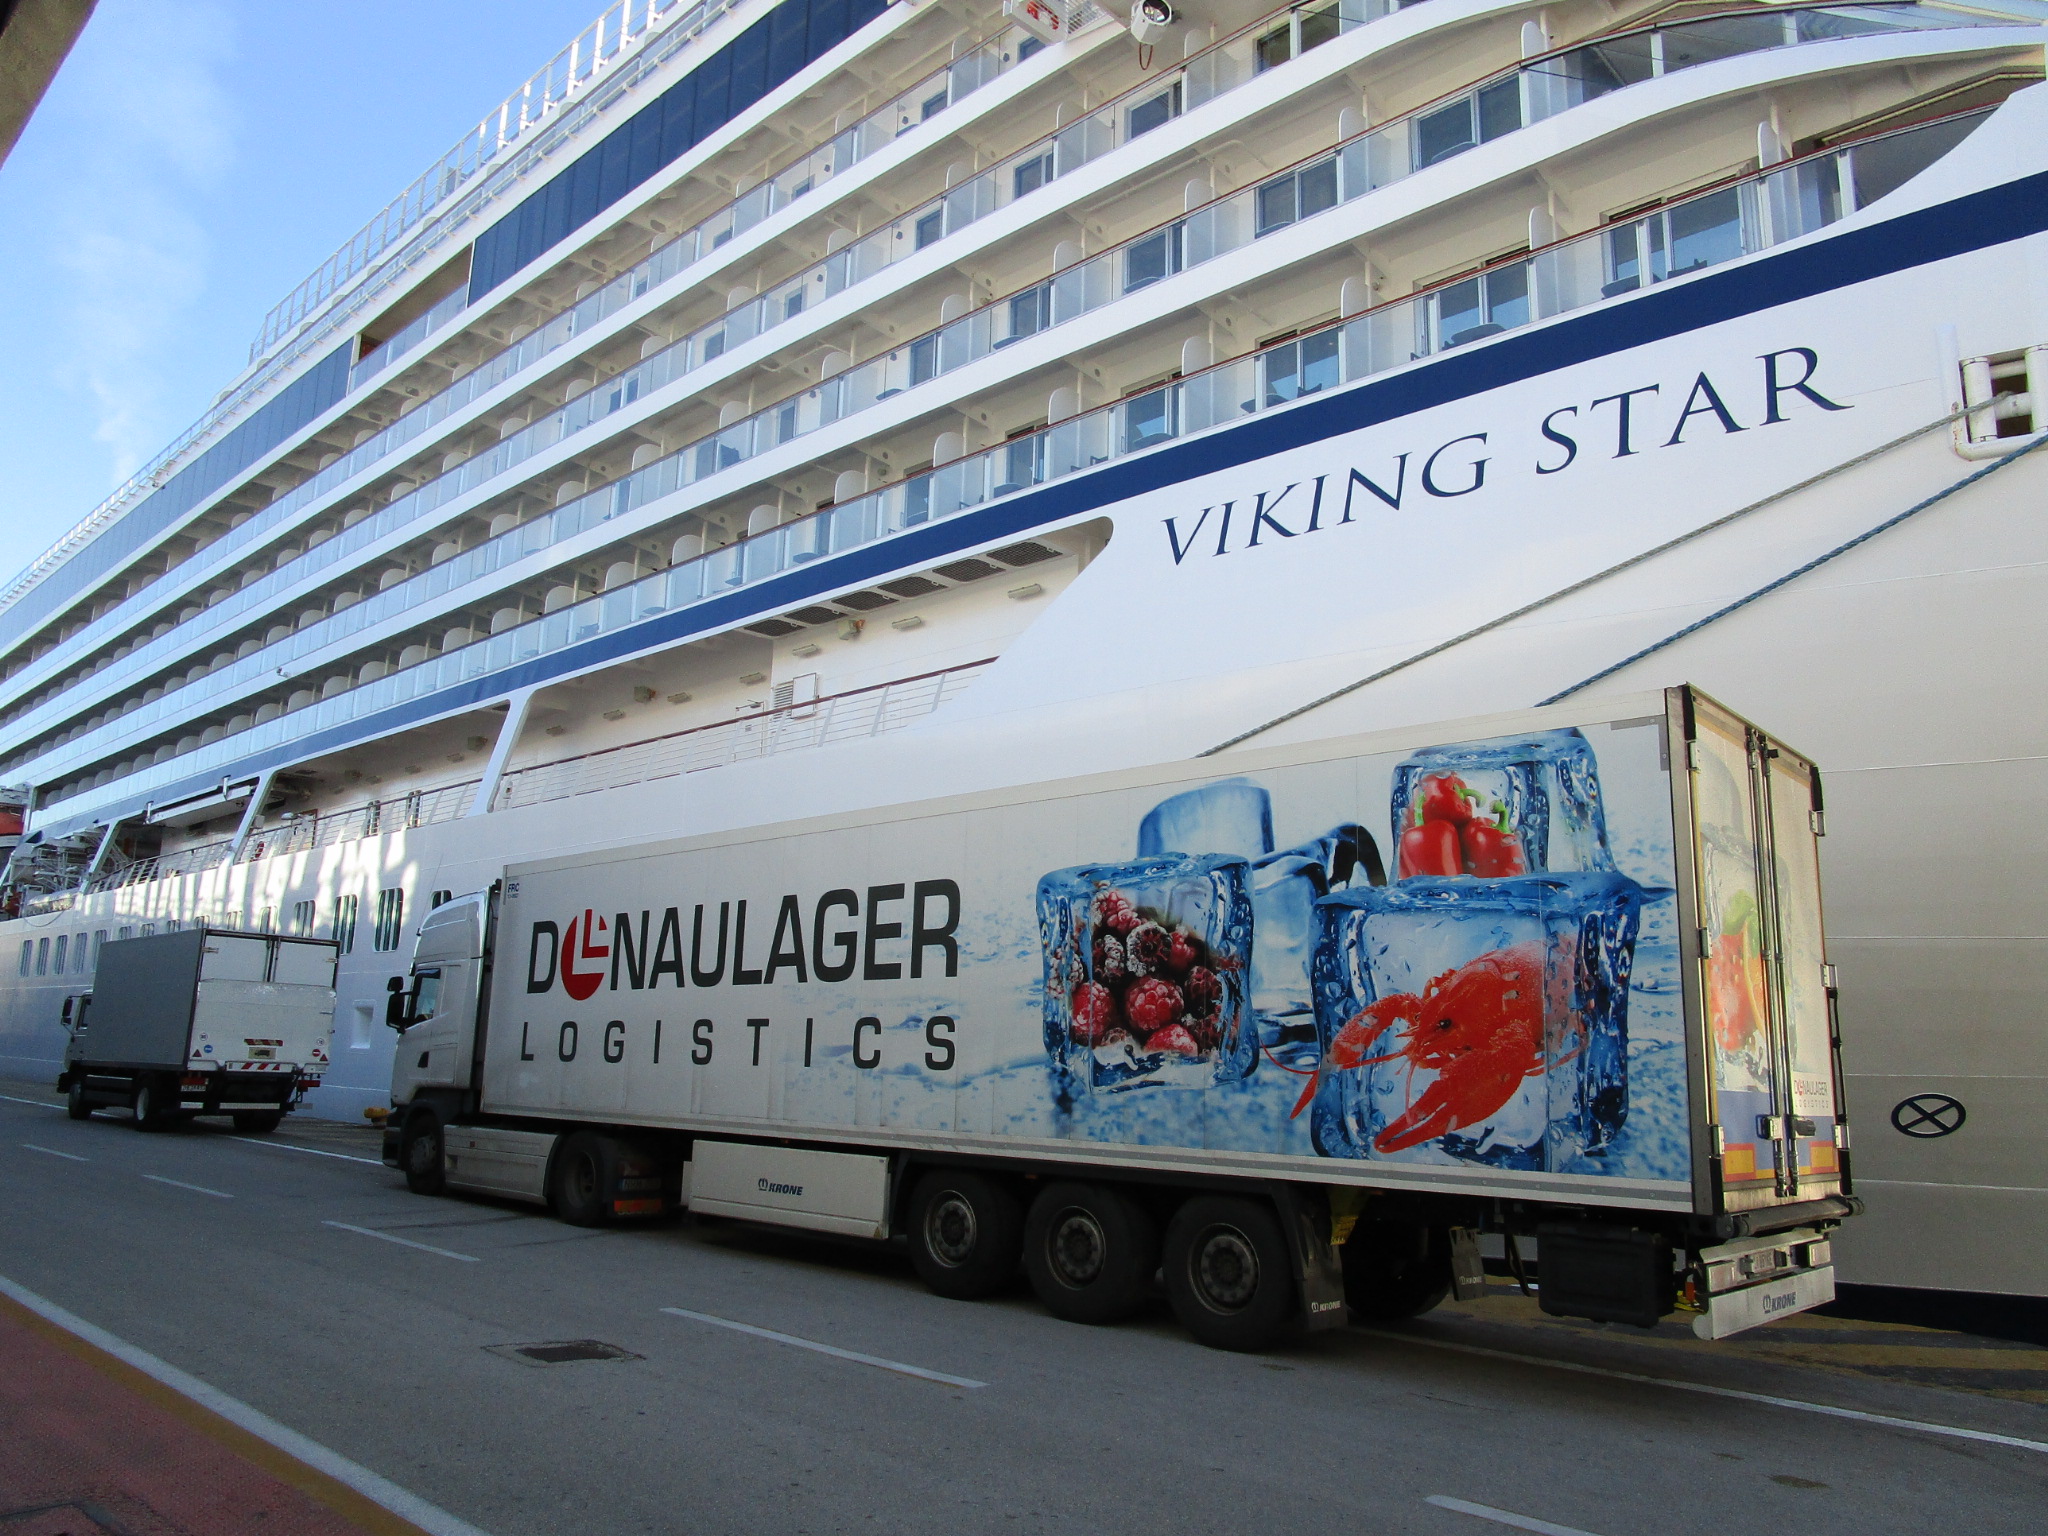 Donaulager Logistics is successfull in a new business segment